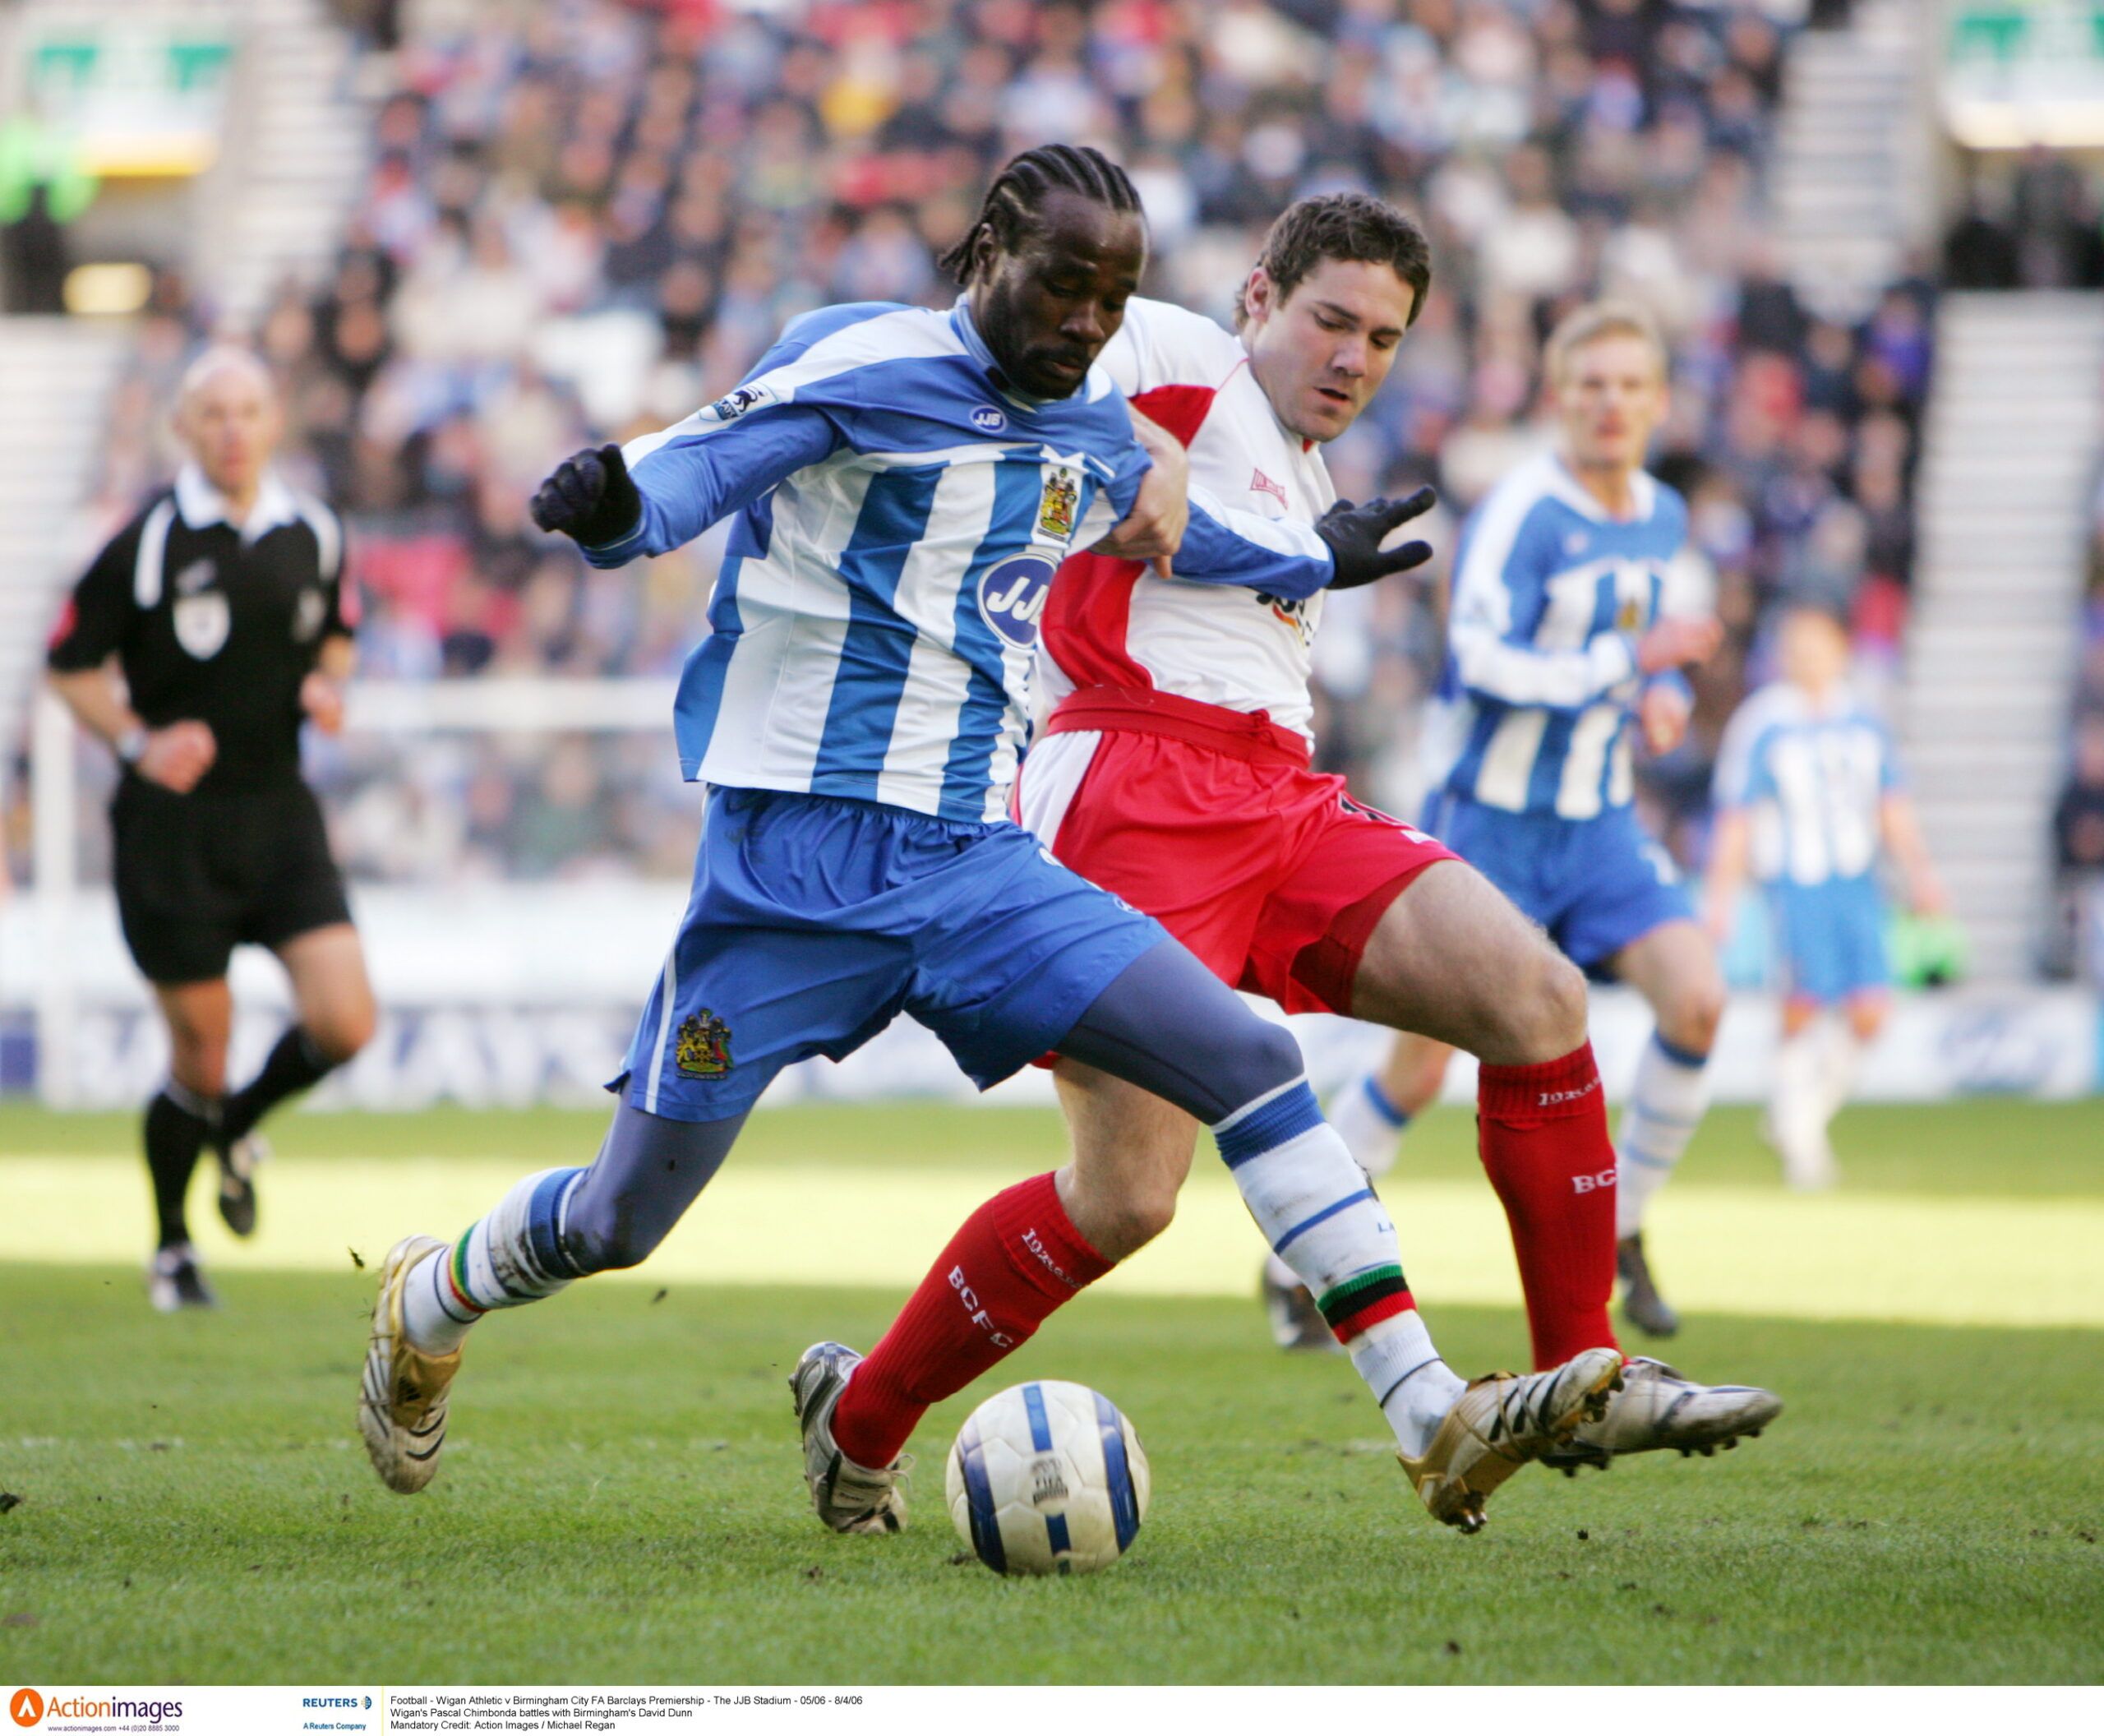 Football - Wigan Athletic v Birmingham City FA Barclays Premiership - The JJB Stadium - 05/06 - 8/4/06 
Wigan's Pascal Chimbonda battles with Birmingham's David Dunn 
Mandatory Credit: Action Images / Michael Regan 
NO ONLINE/INTERNET USE WITHOUT A LICENCE FROM THE FOOTBALL DATA CO LTD. FOR LICENCE ENQUIRIES PLEASE TELEPHONE +44 207 298 1656.